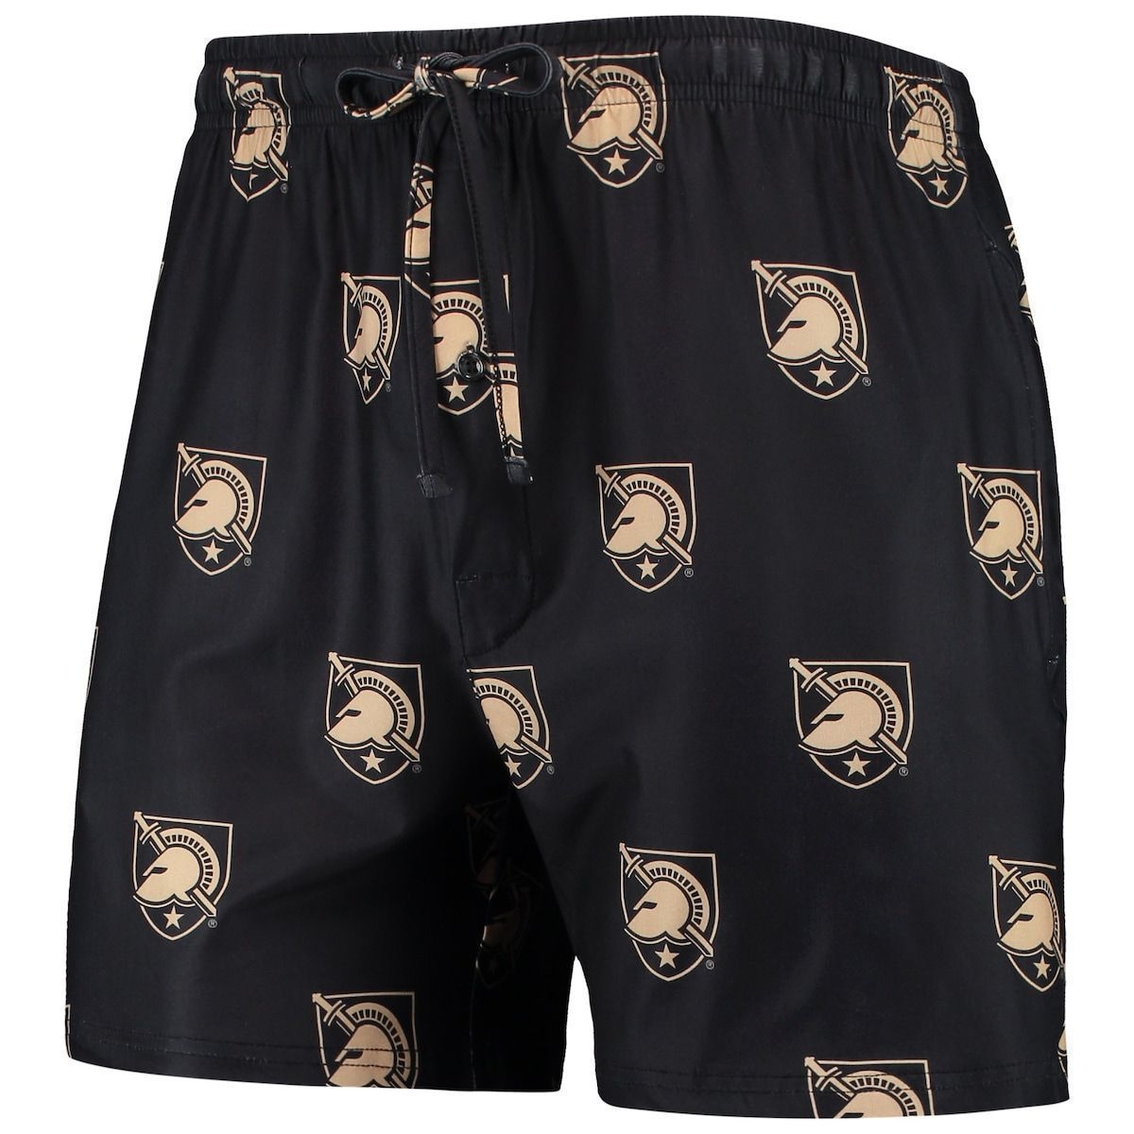 Concepts Sport Men's Black Army Black Knights Flagship Allover Print Jam Shorts - Image 3 of 4